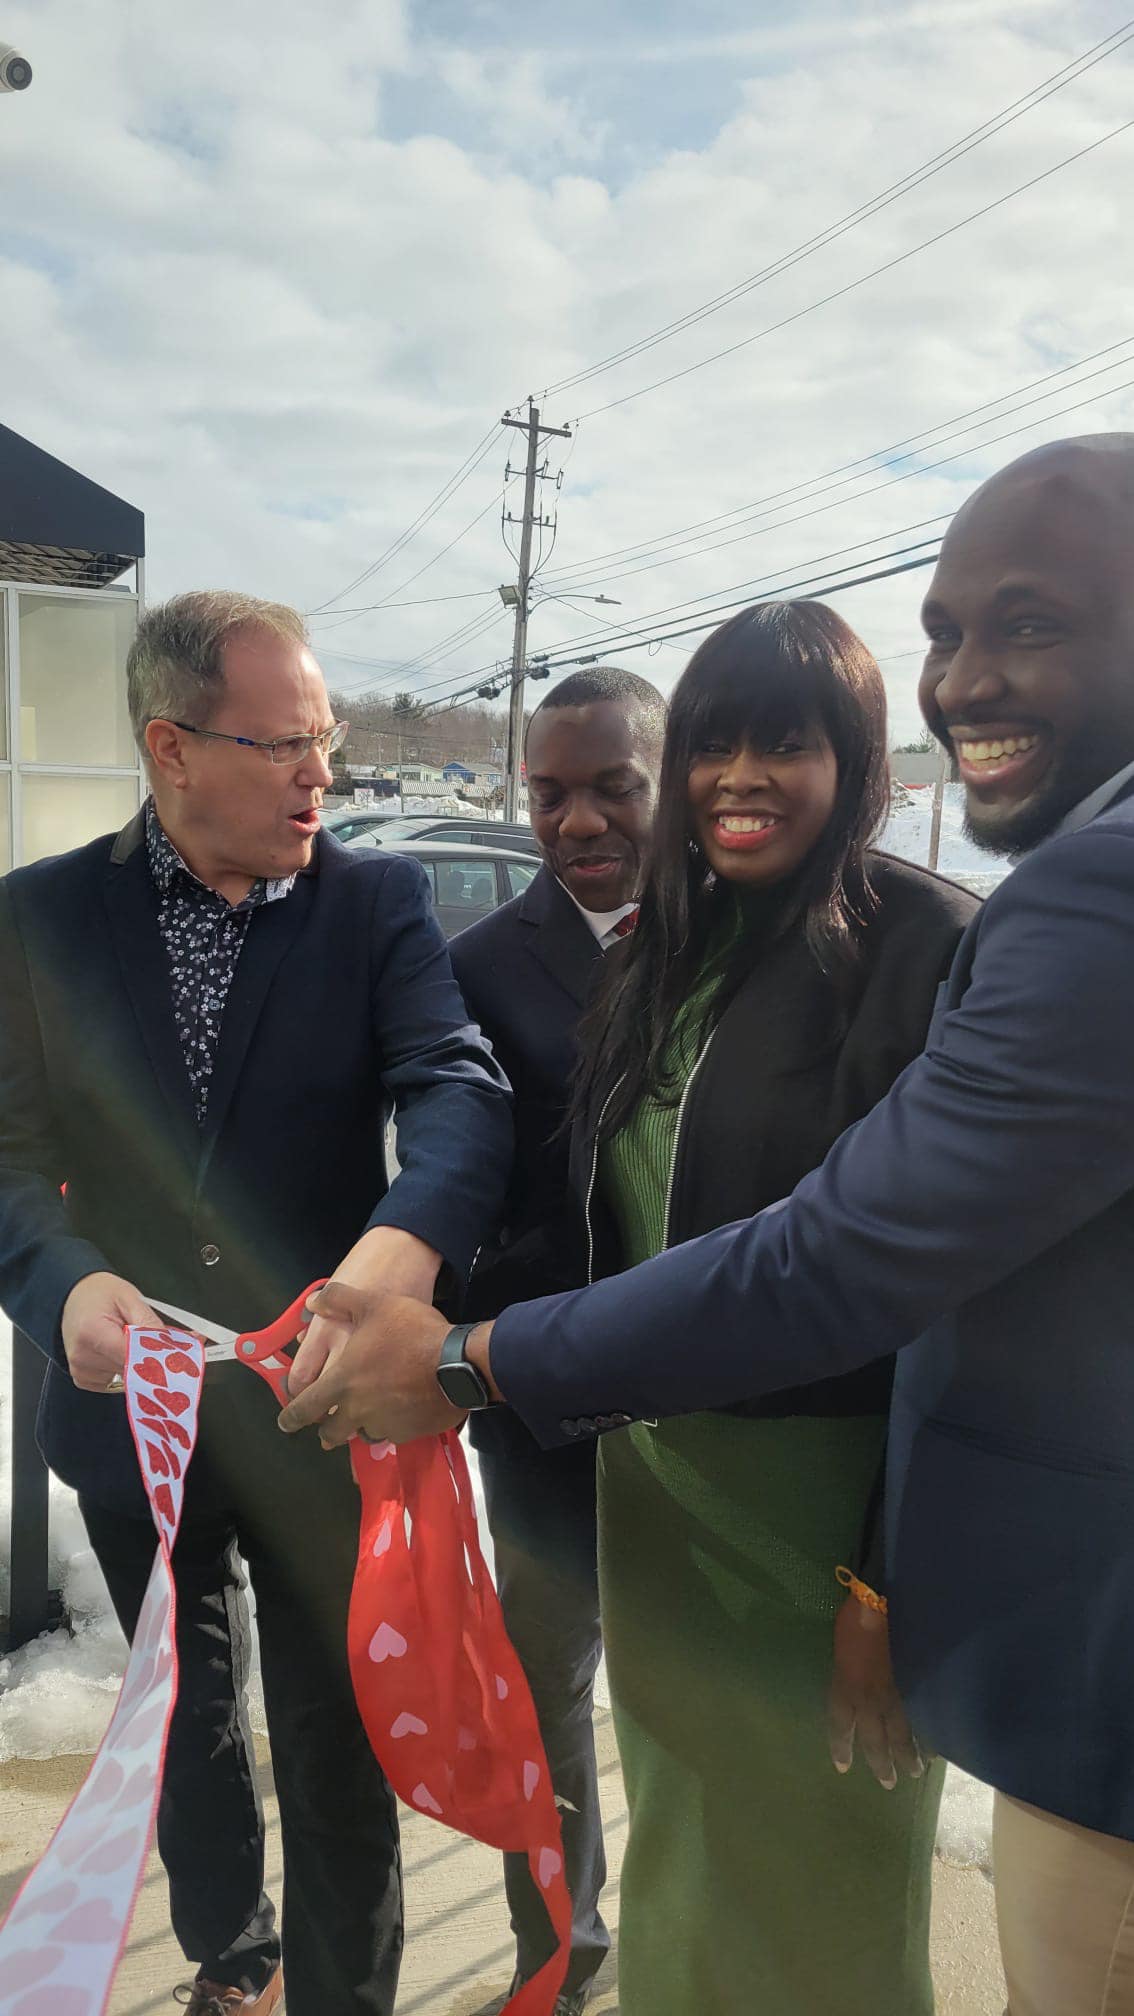 RBC Business Account Manager Liston Bailey (far right), with Motunrayo Ige (second from right), cutting the ribbon at opening day for Iyalode Africa Wholesale Market